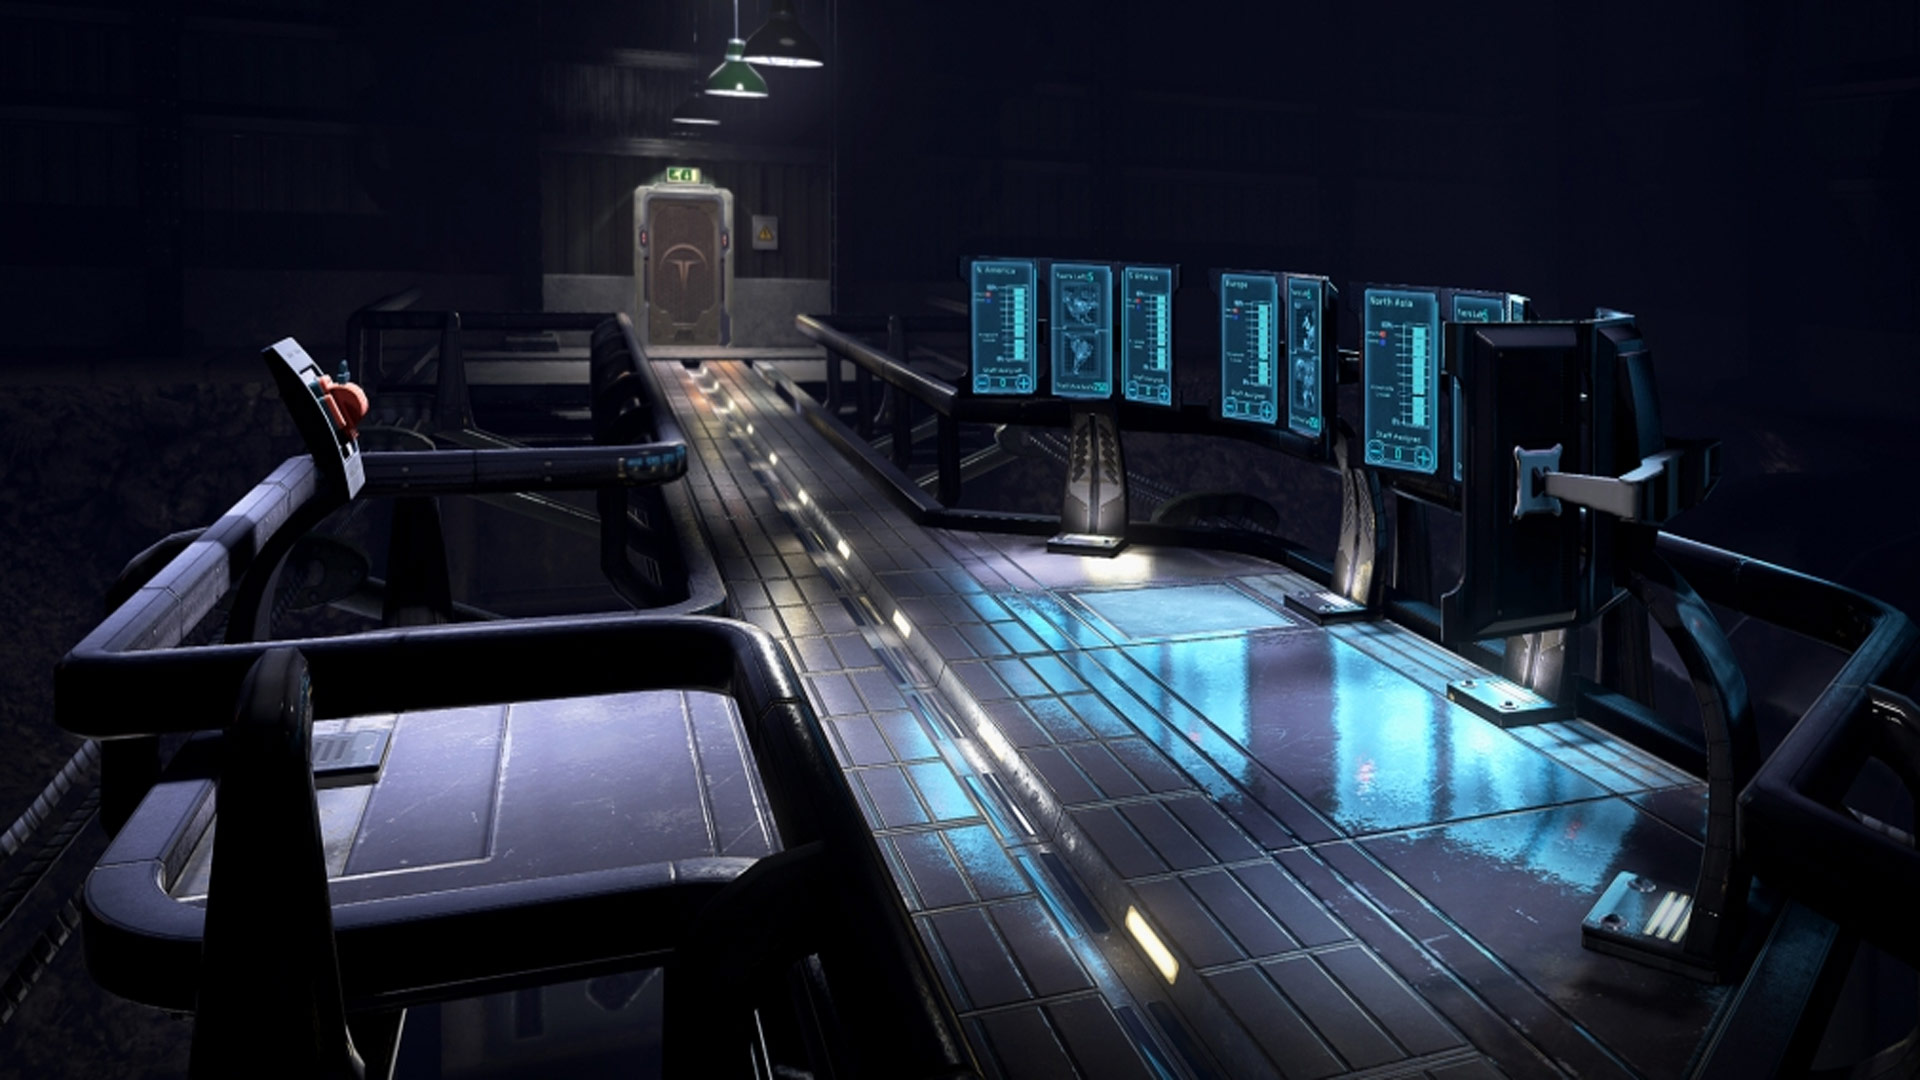 The Assembly Screenshot